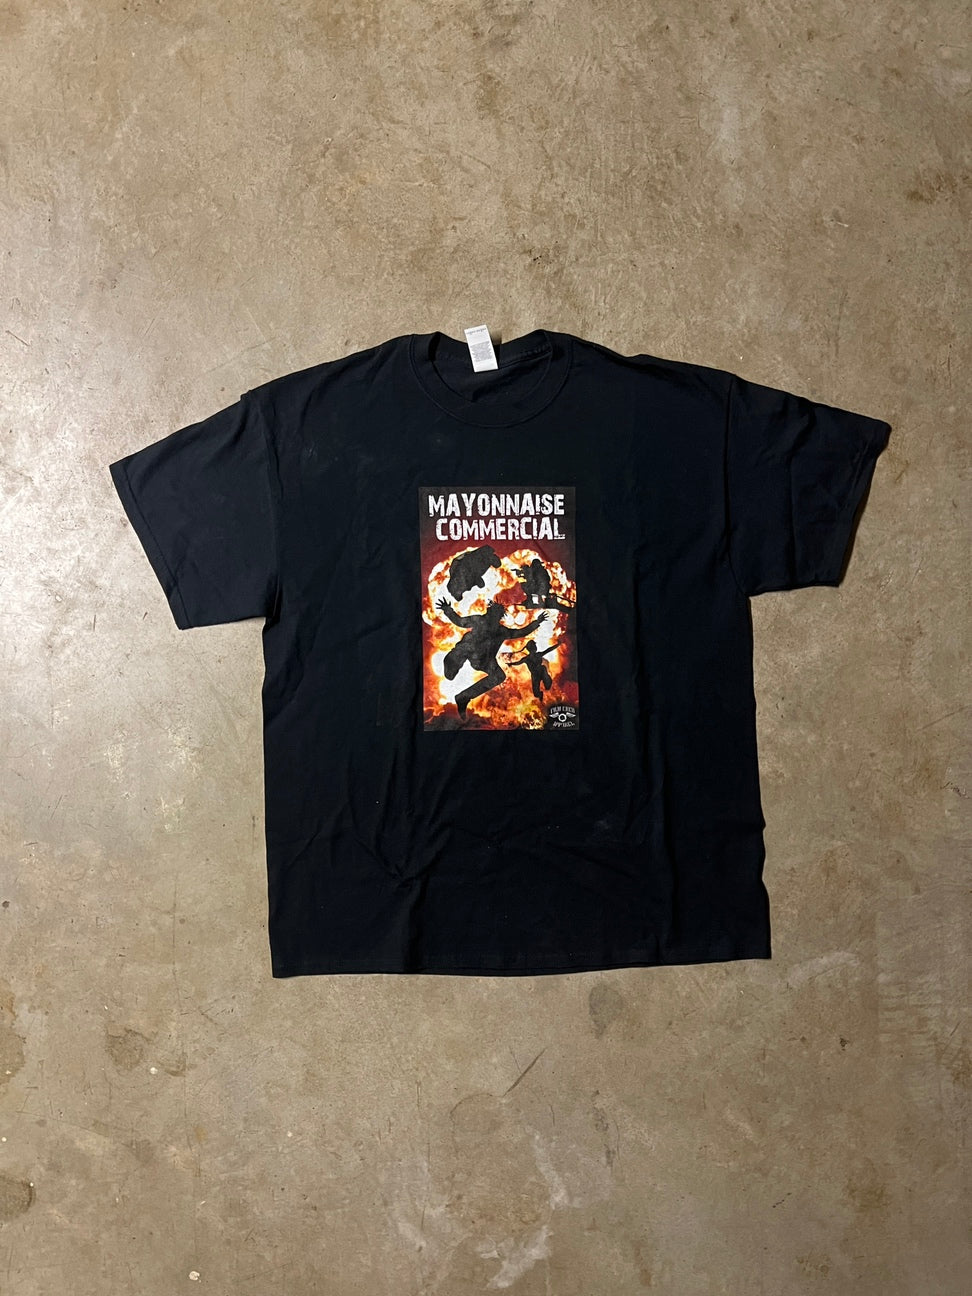 "Mayonnaise Commercial" T-Shirt - XL